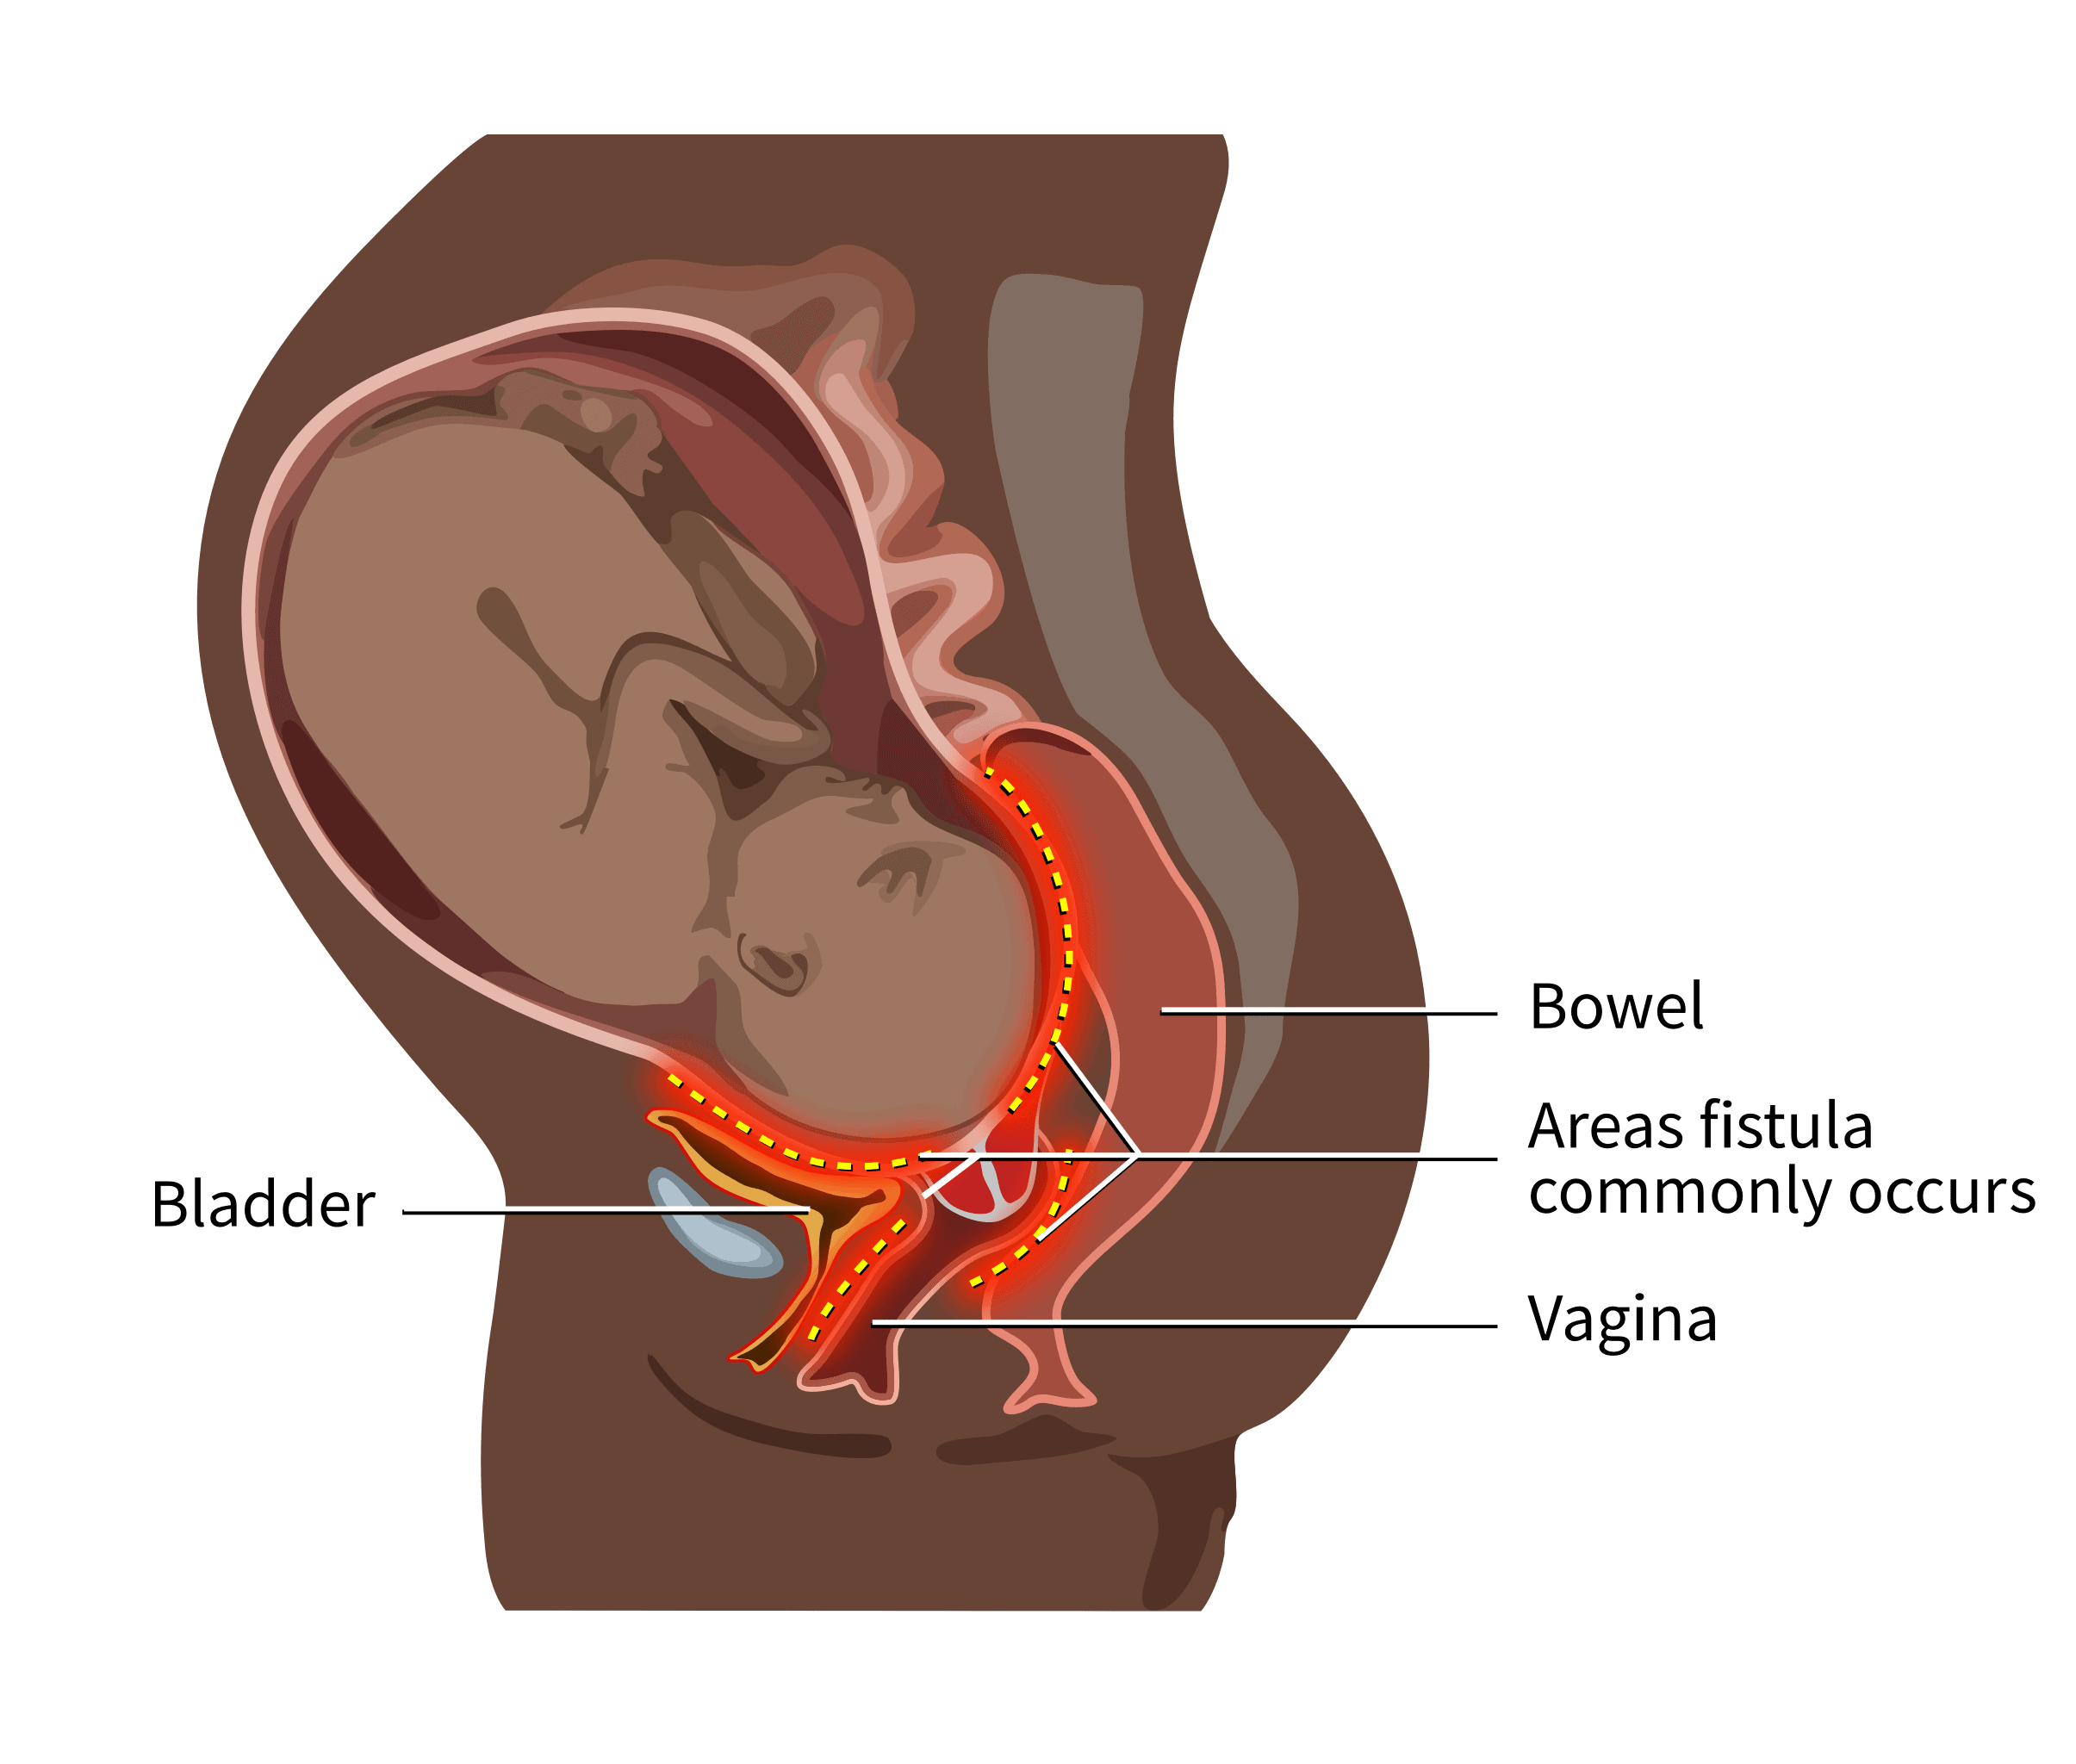 Medical illustration showing how obstetric fistula occurs